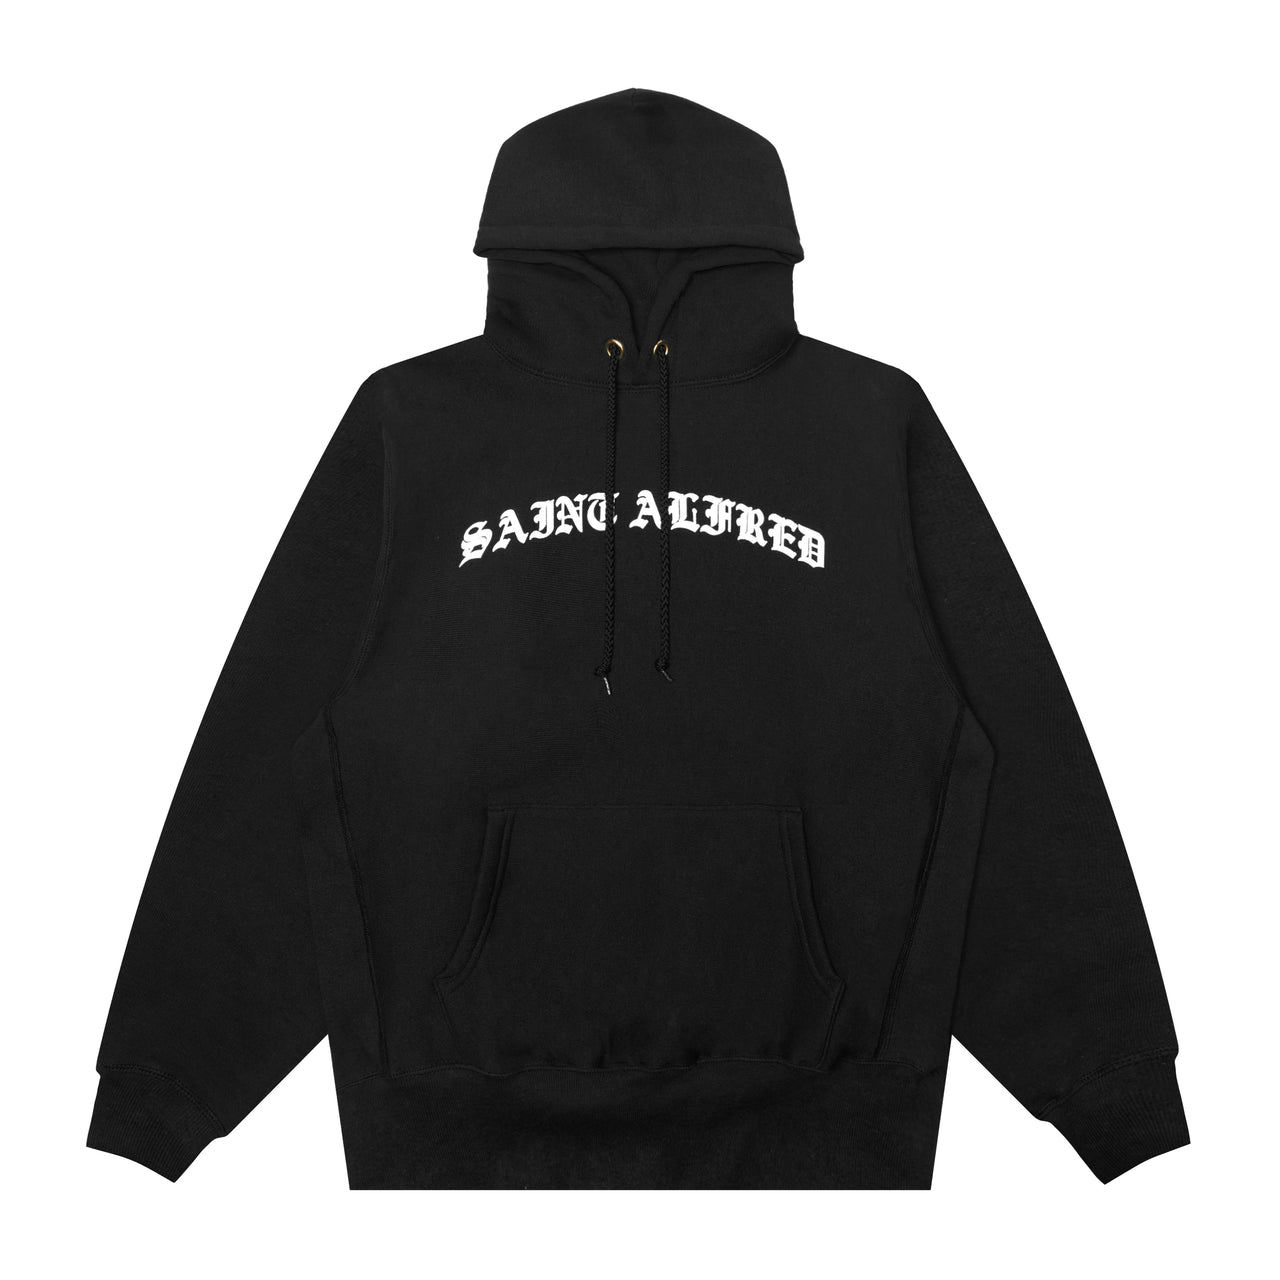 CAMBER CROSS-KNIT PULLOVER HOODED FLEECE WINTER23 MADE IN USA